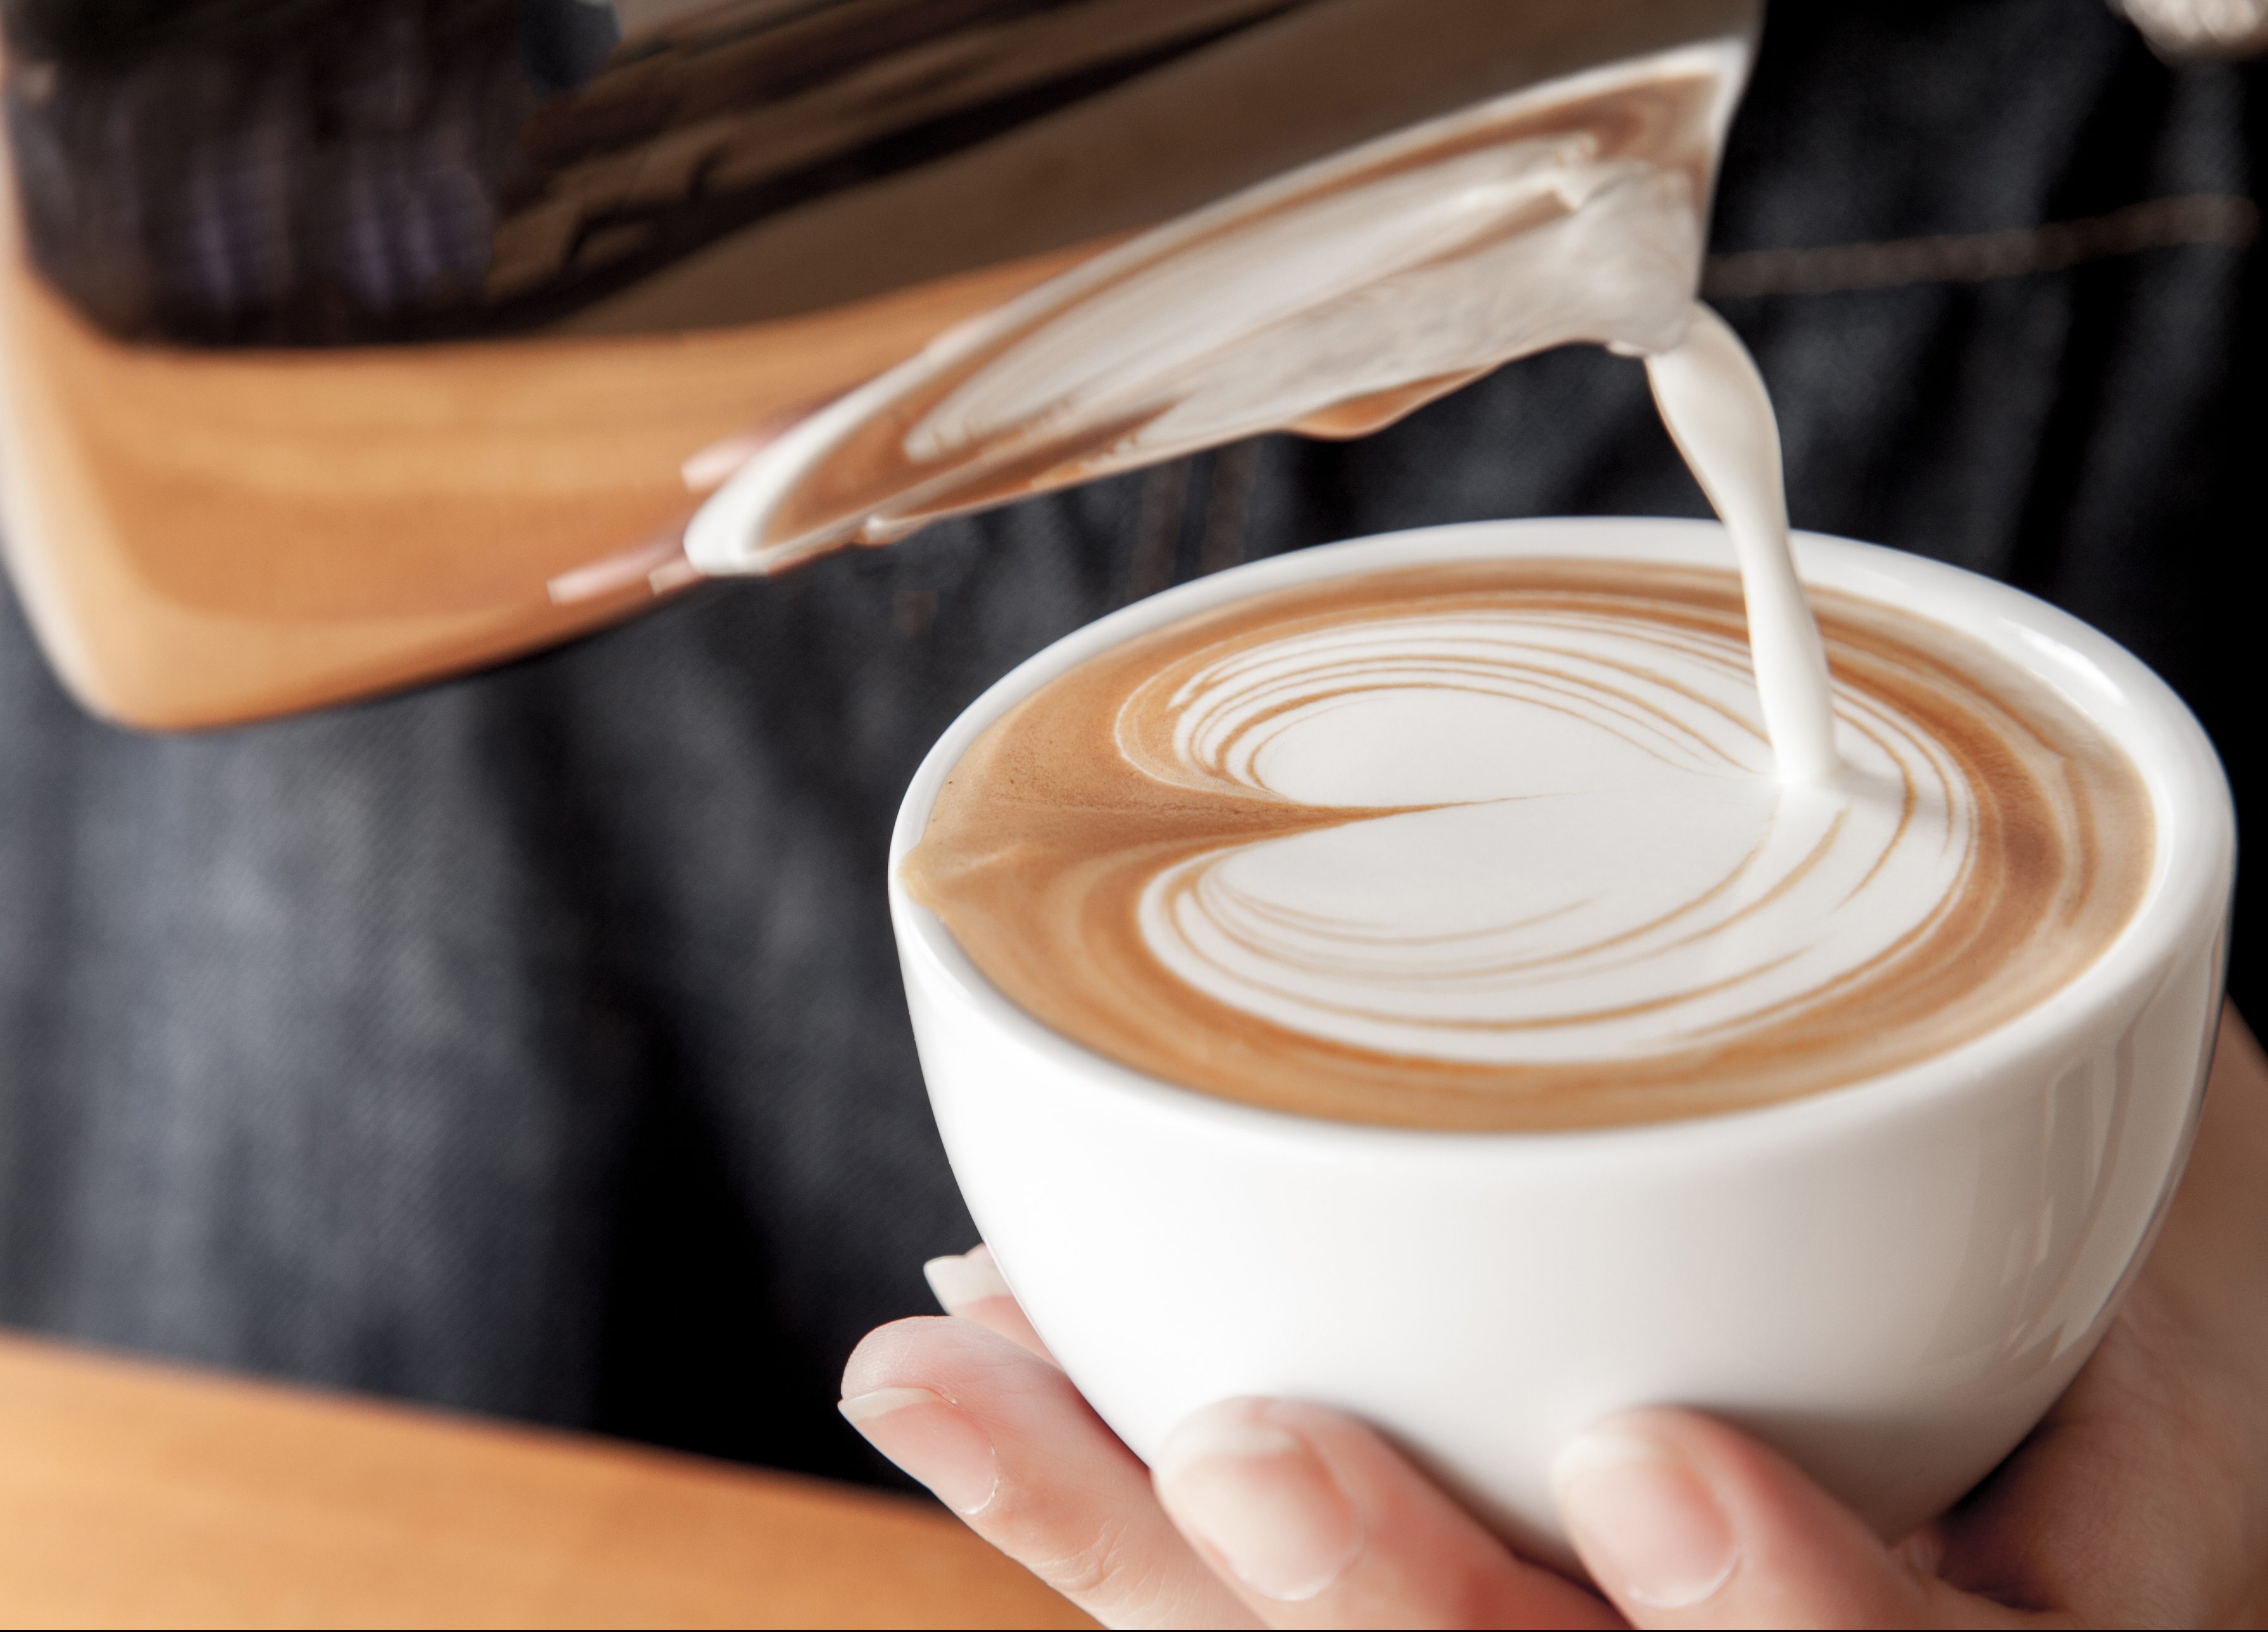 FUNIBER-pouring-latte-art-into-the-cup